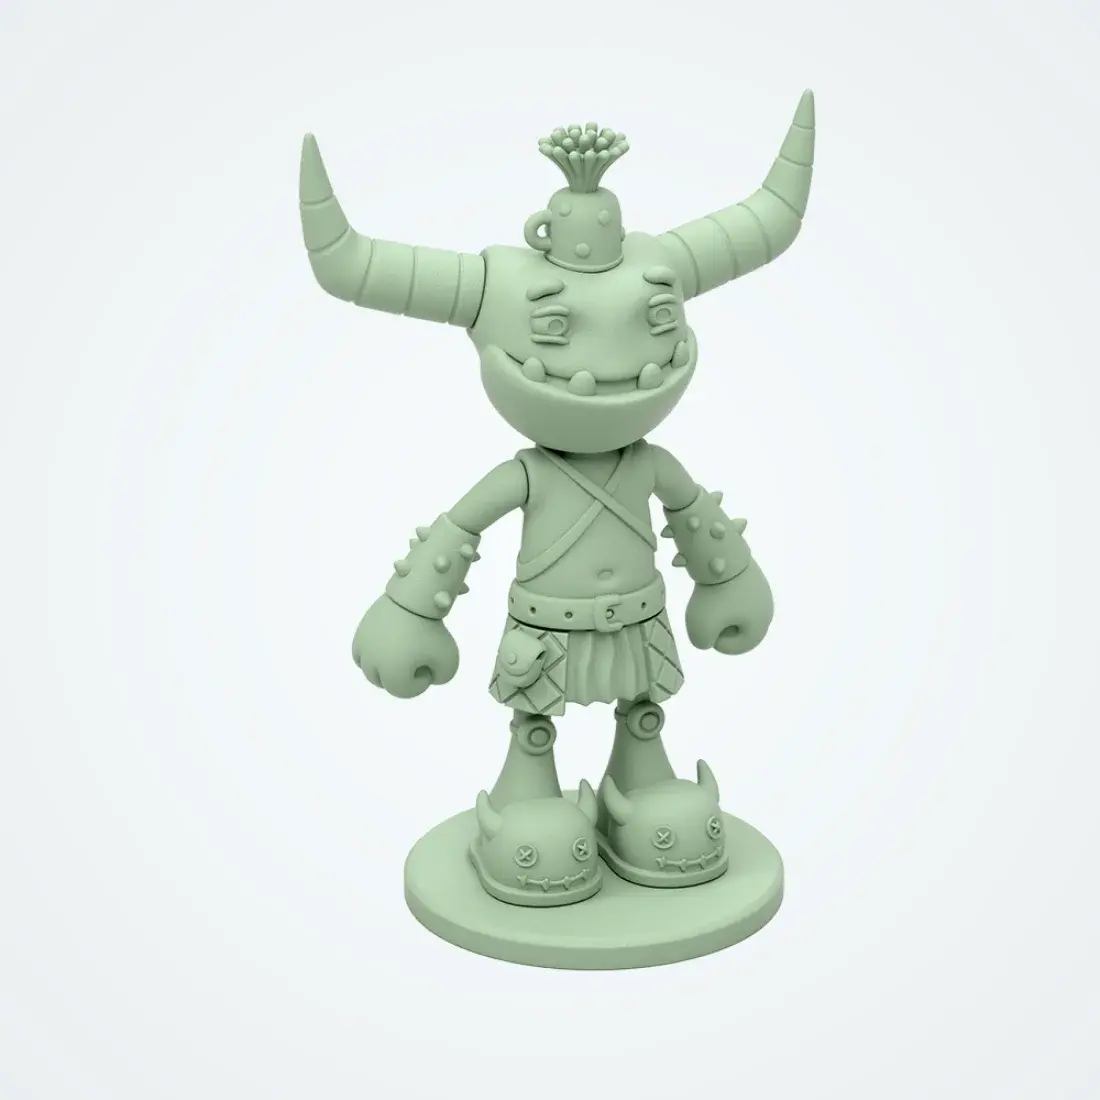 Toogle toy 3D character 3 by devabit